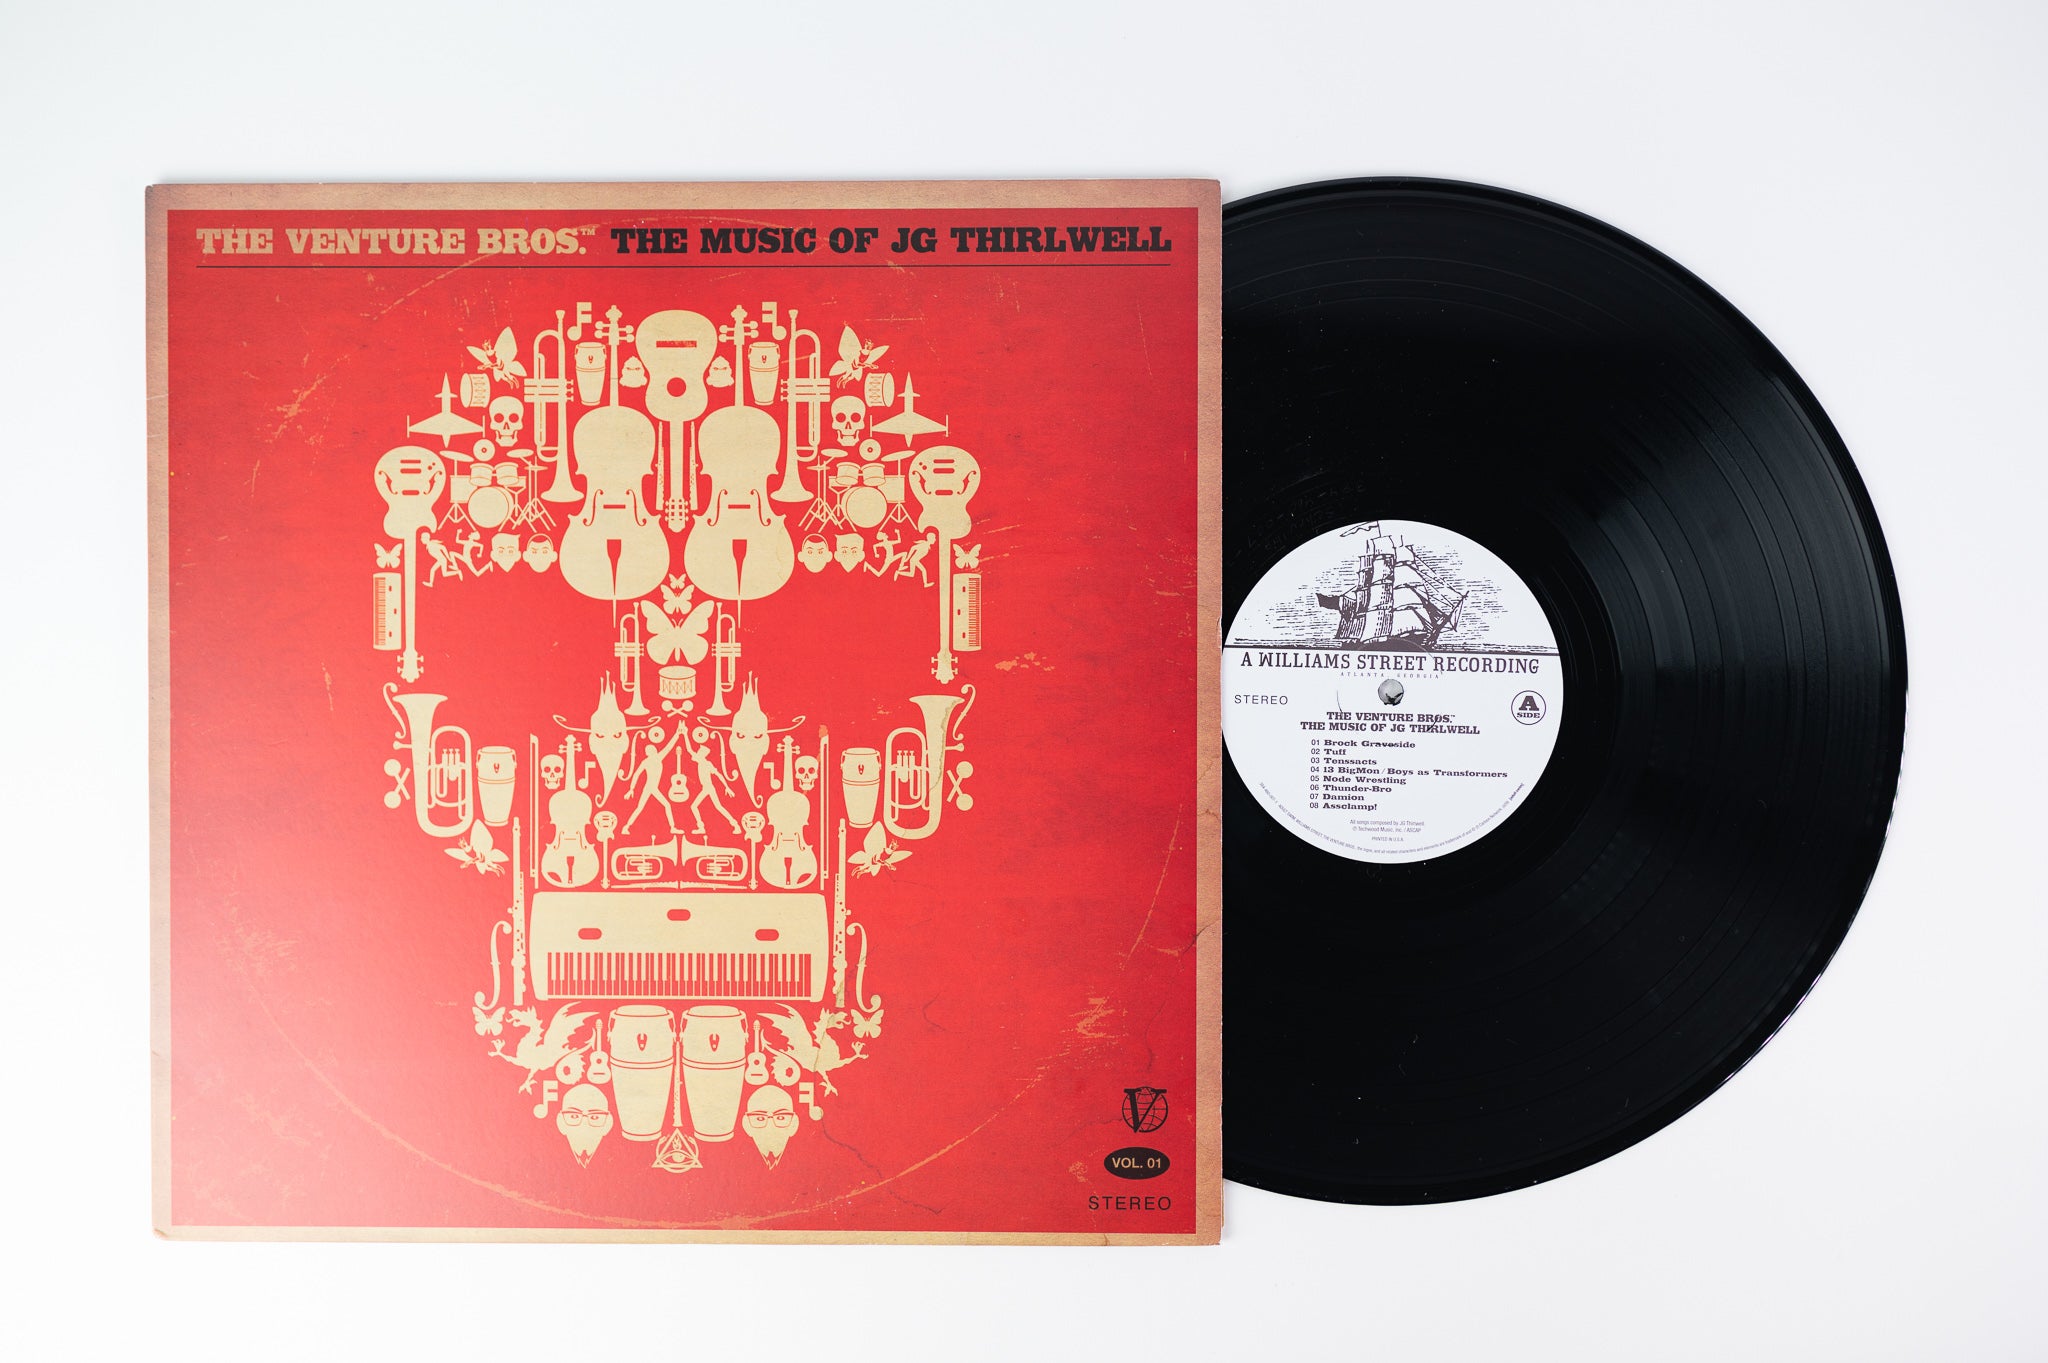 JG Thirlwell  - The Venture Bros The Music Of JG Thirlwell Vol 01 on Williams Street